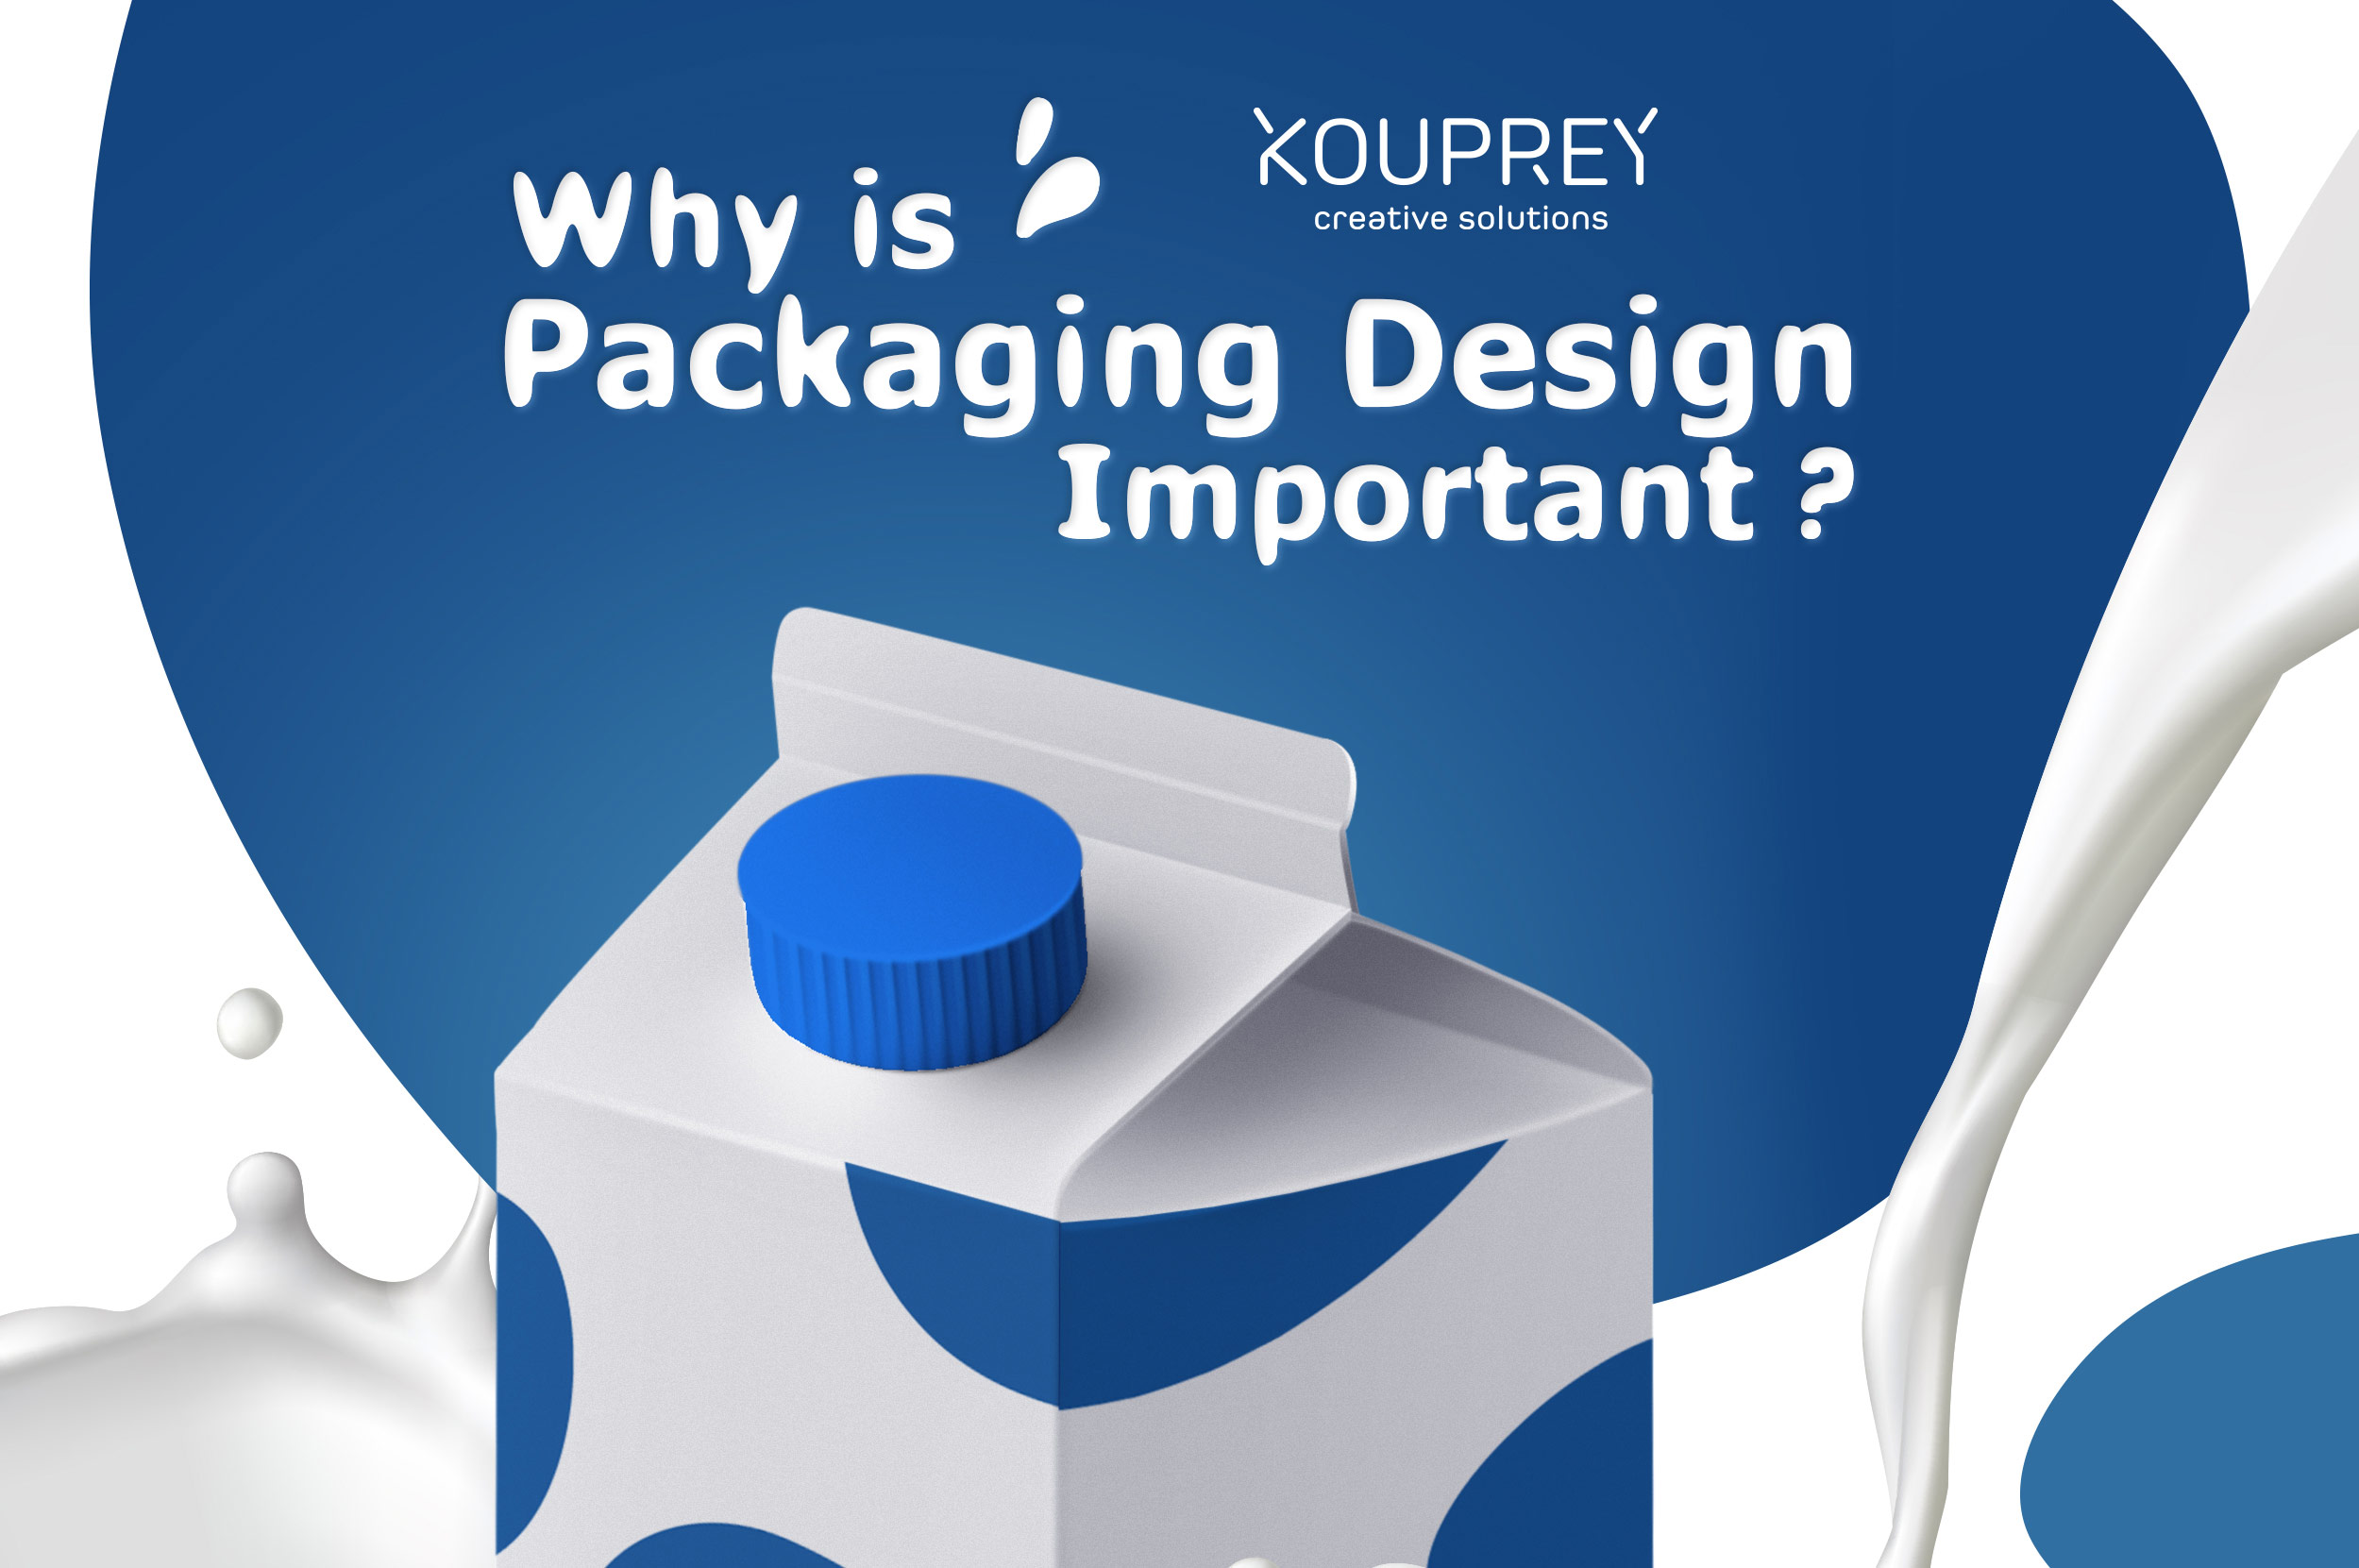 Why is packaging design important?